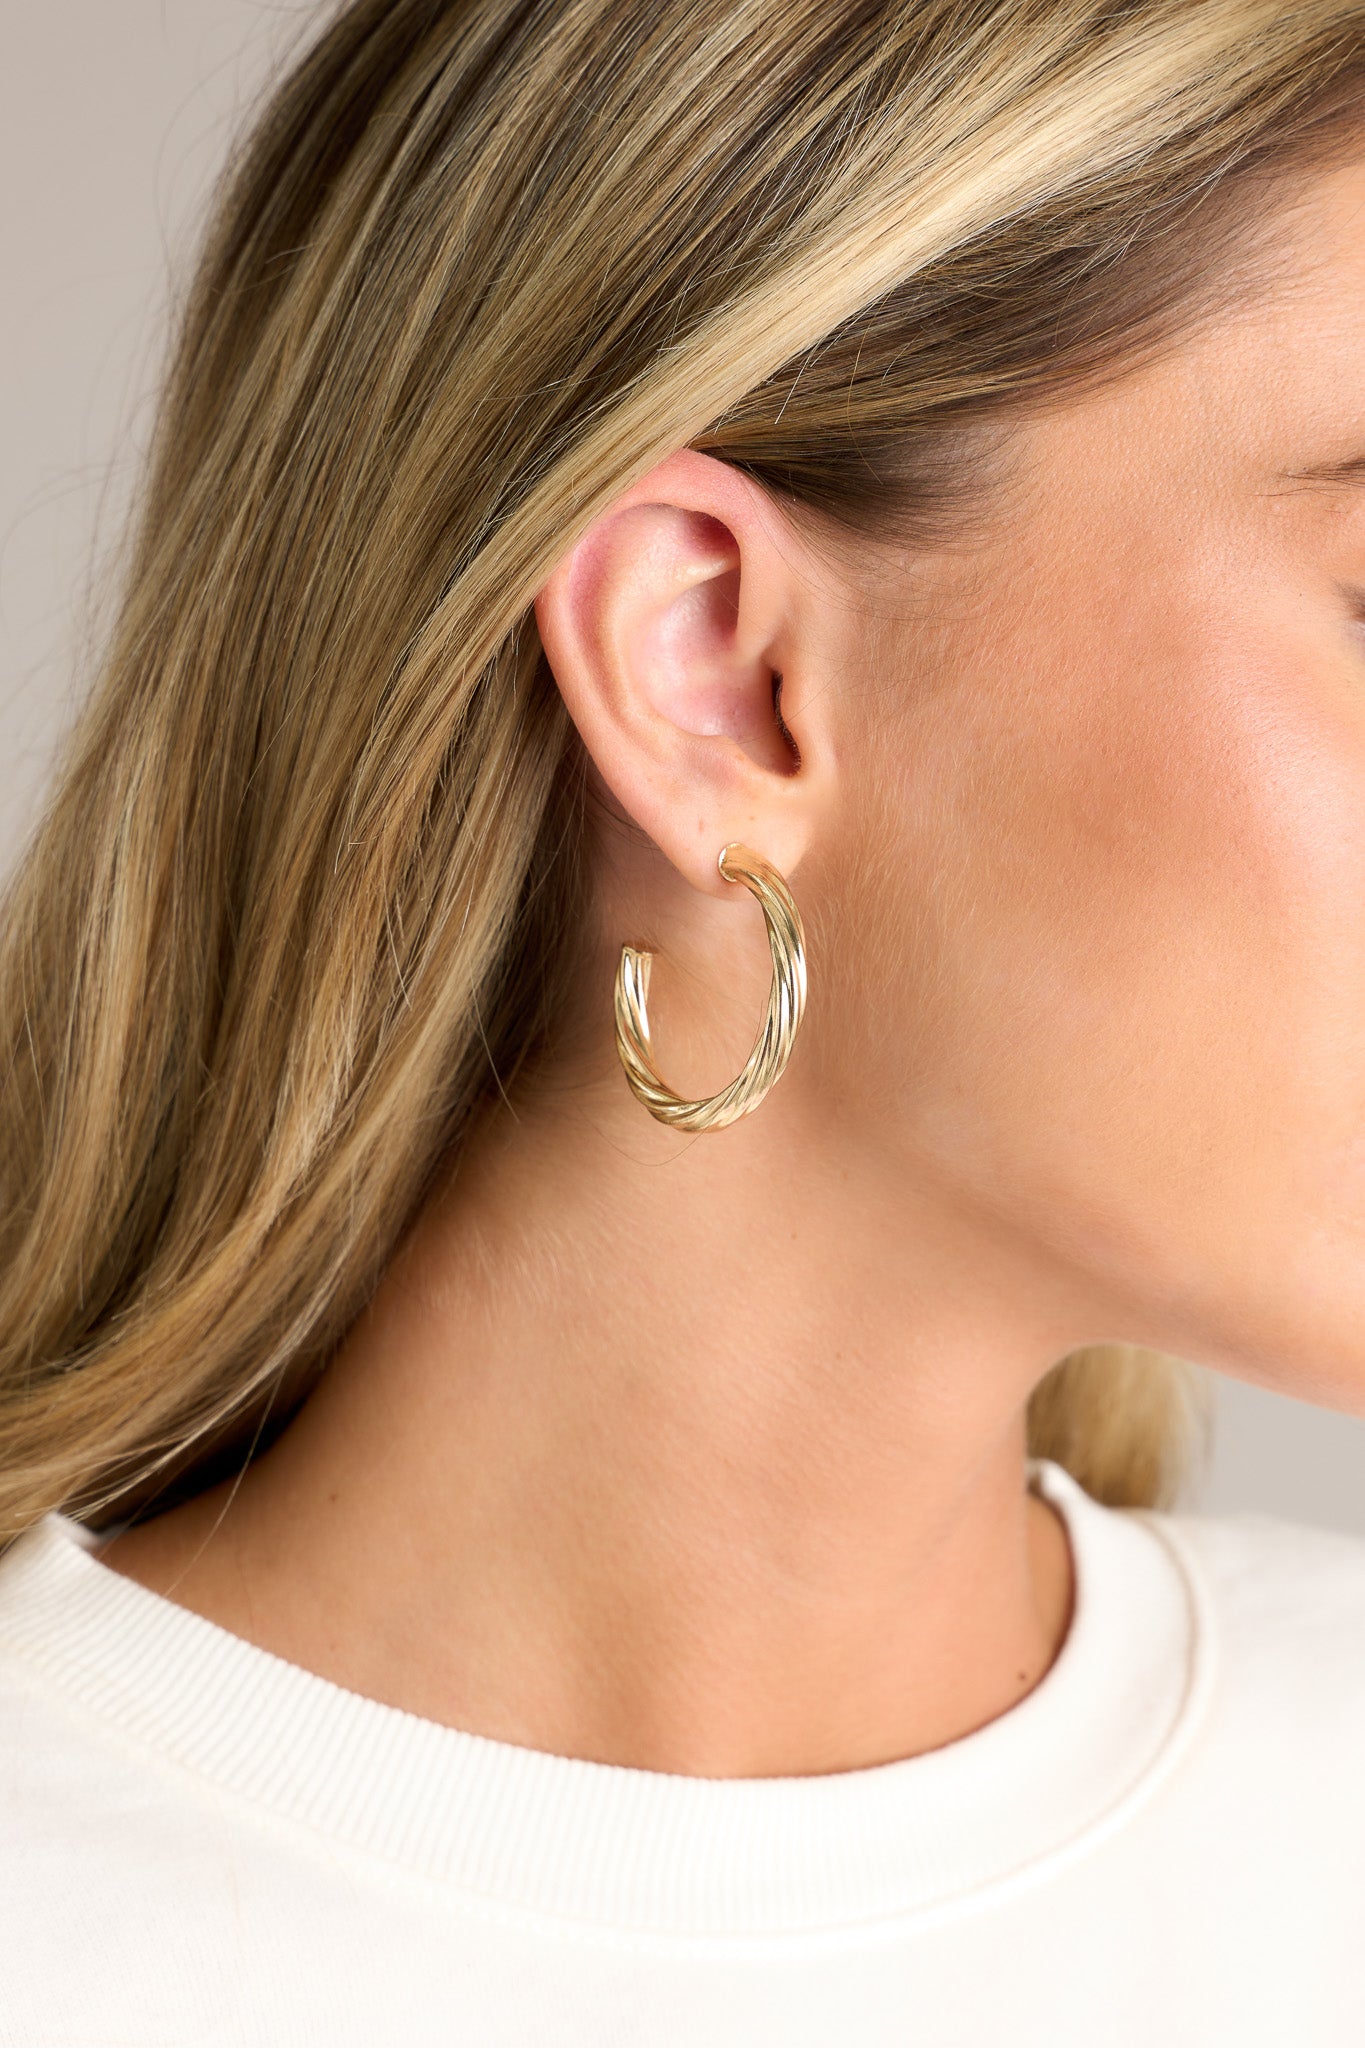 These earrings feature gold hardware, a twist like design, and a secure post backing.